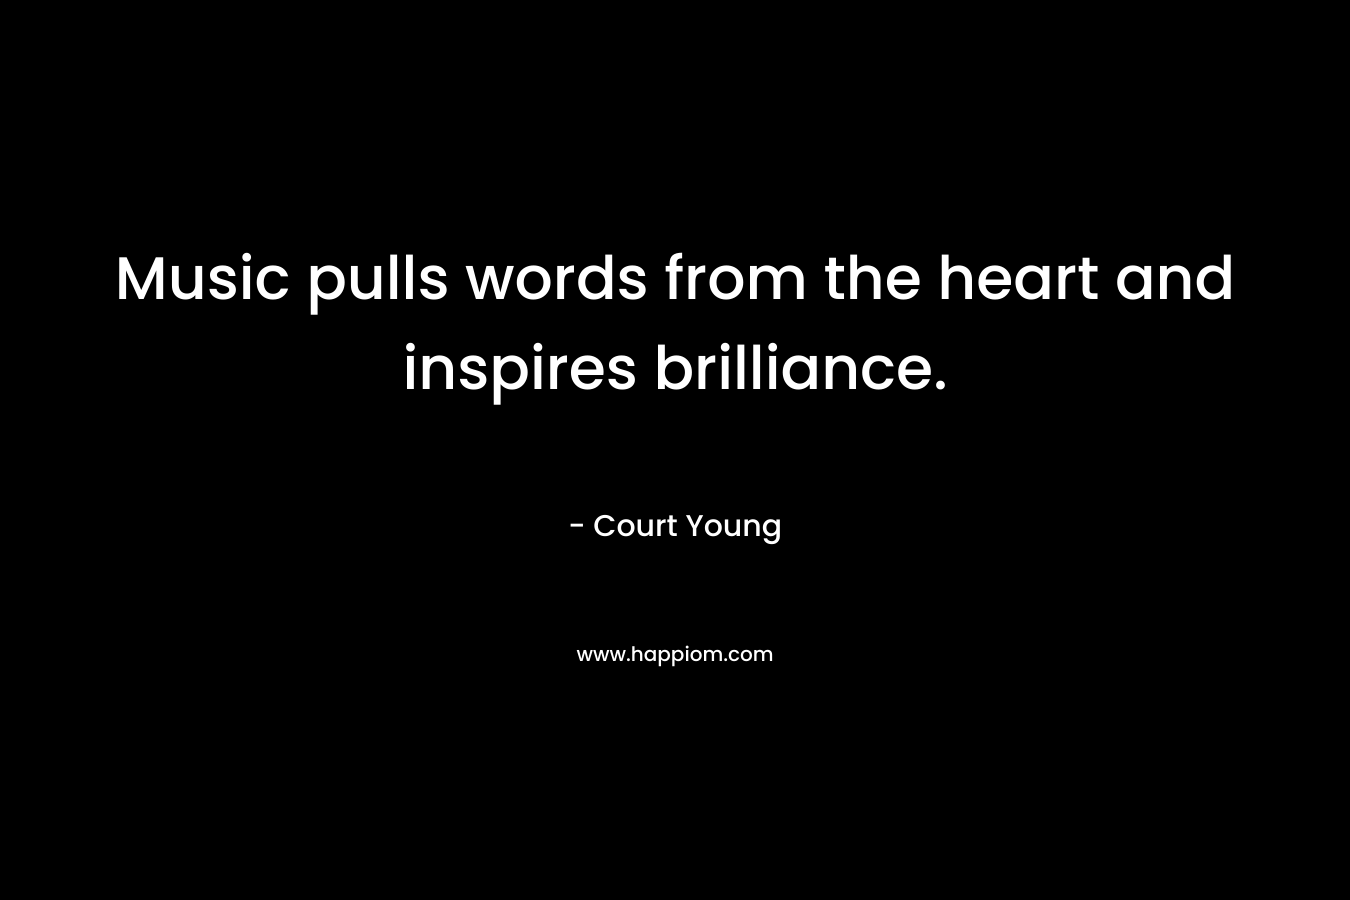 Music pulls words from the heart and inspires brilliance. – Court Young